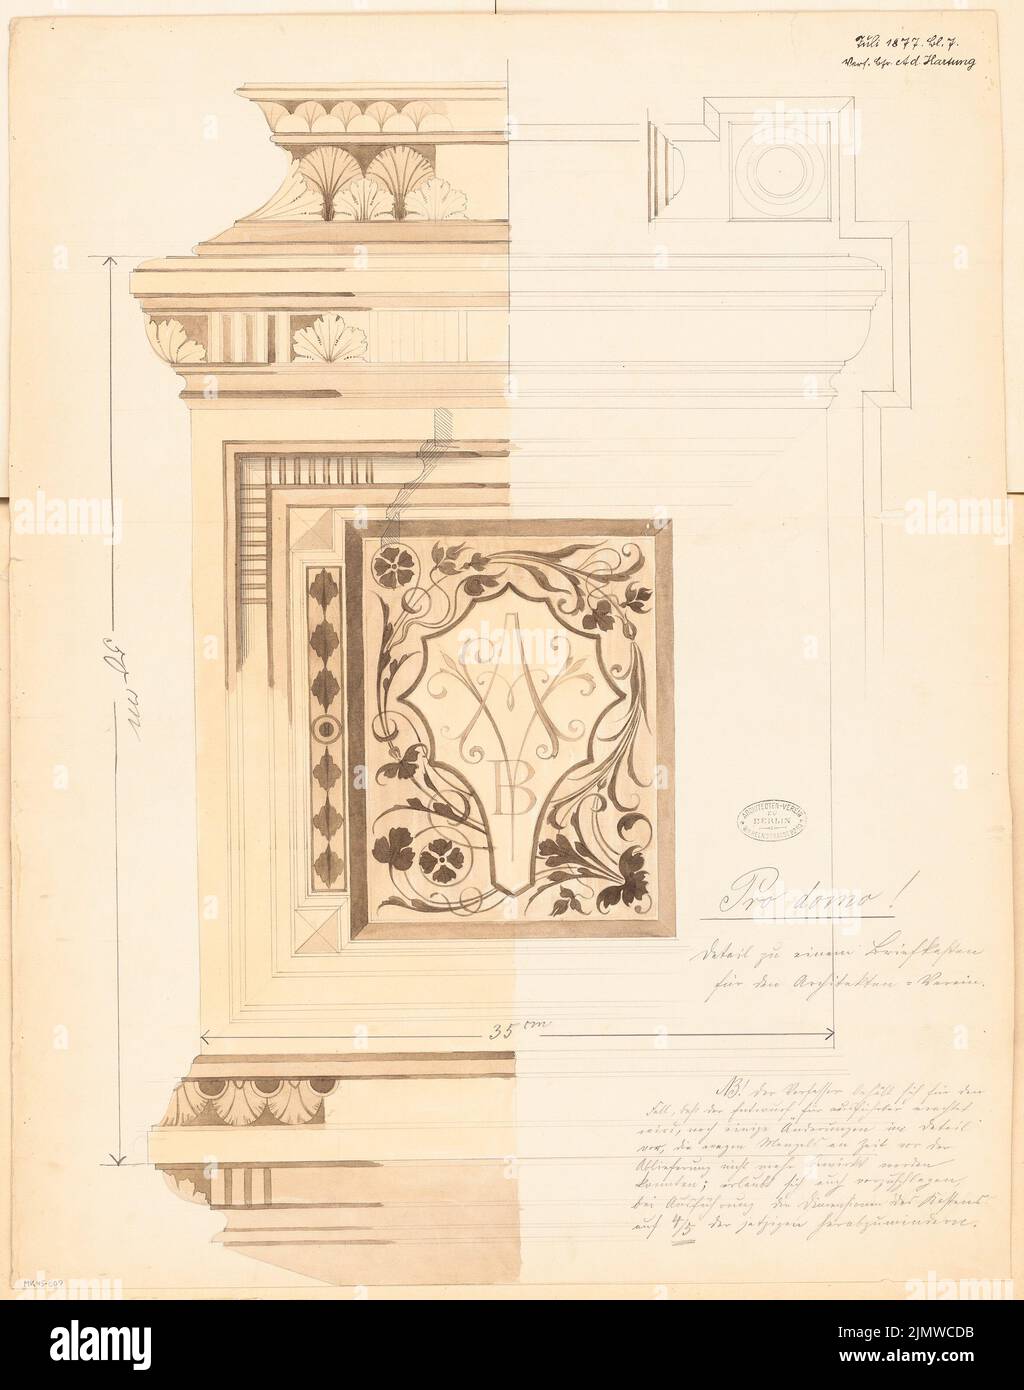 Hartung Adolf (1850-1910), house letter box for the architect association in Berlin. Monthly competition in July 1877 (07.1877): Riss front view (partially) 1: 1; Explanation text. Pencil watercolor on the box, 71.5 x 56.4 cm (including scan edges) Hartung Adolf  (1850-1910): Hausbriefkasten für den Architekten-Verein zu Berlin. Monatskonkurrenz Juli 1877 Stock Photo